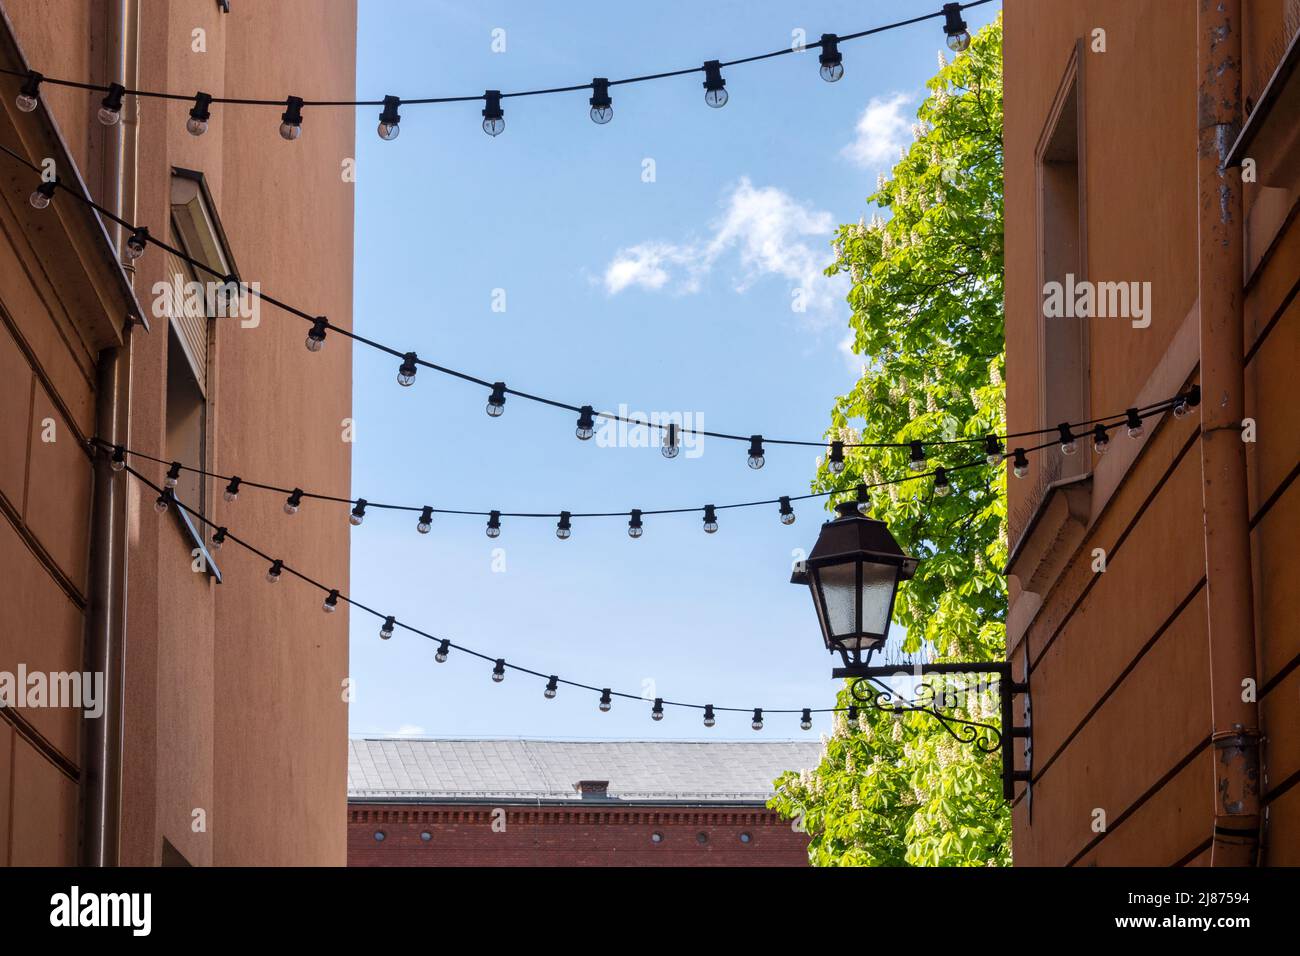 Light garland on the street at daylight. Decoration of the street with vintage Edison bulbs garland, festive city decorations Stock Photo